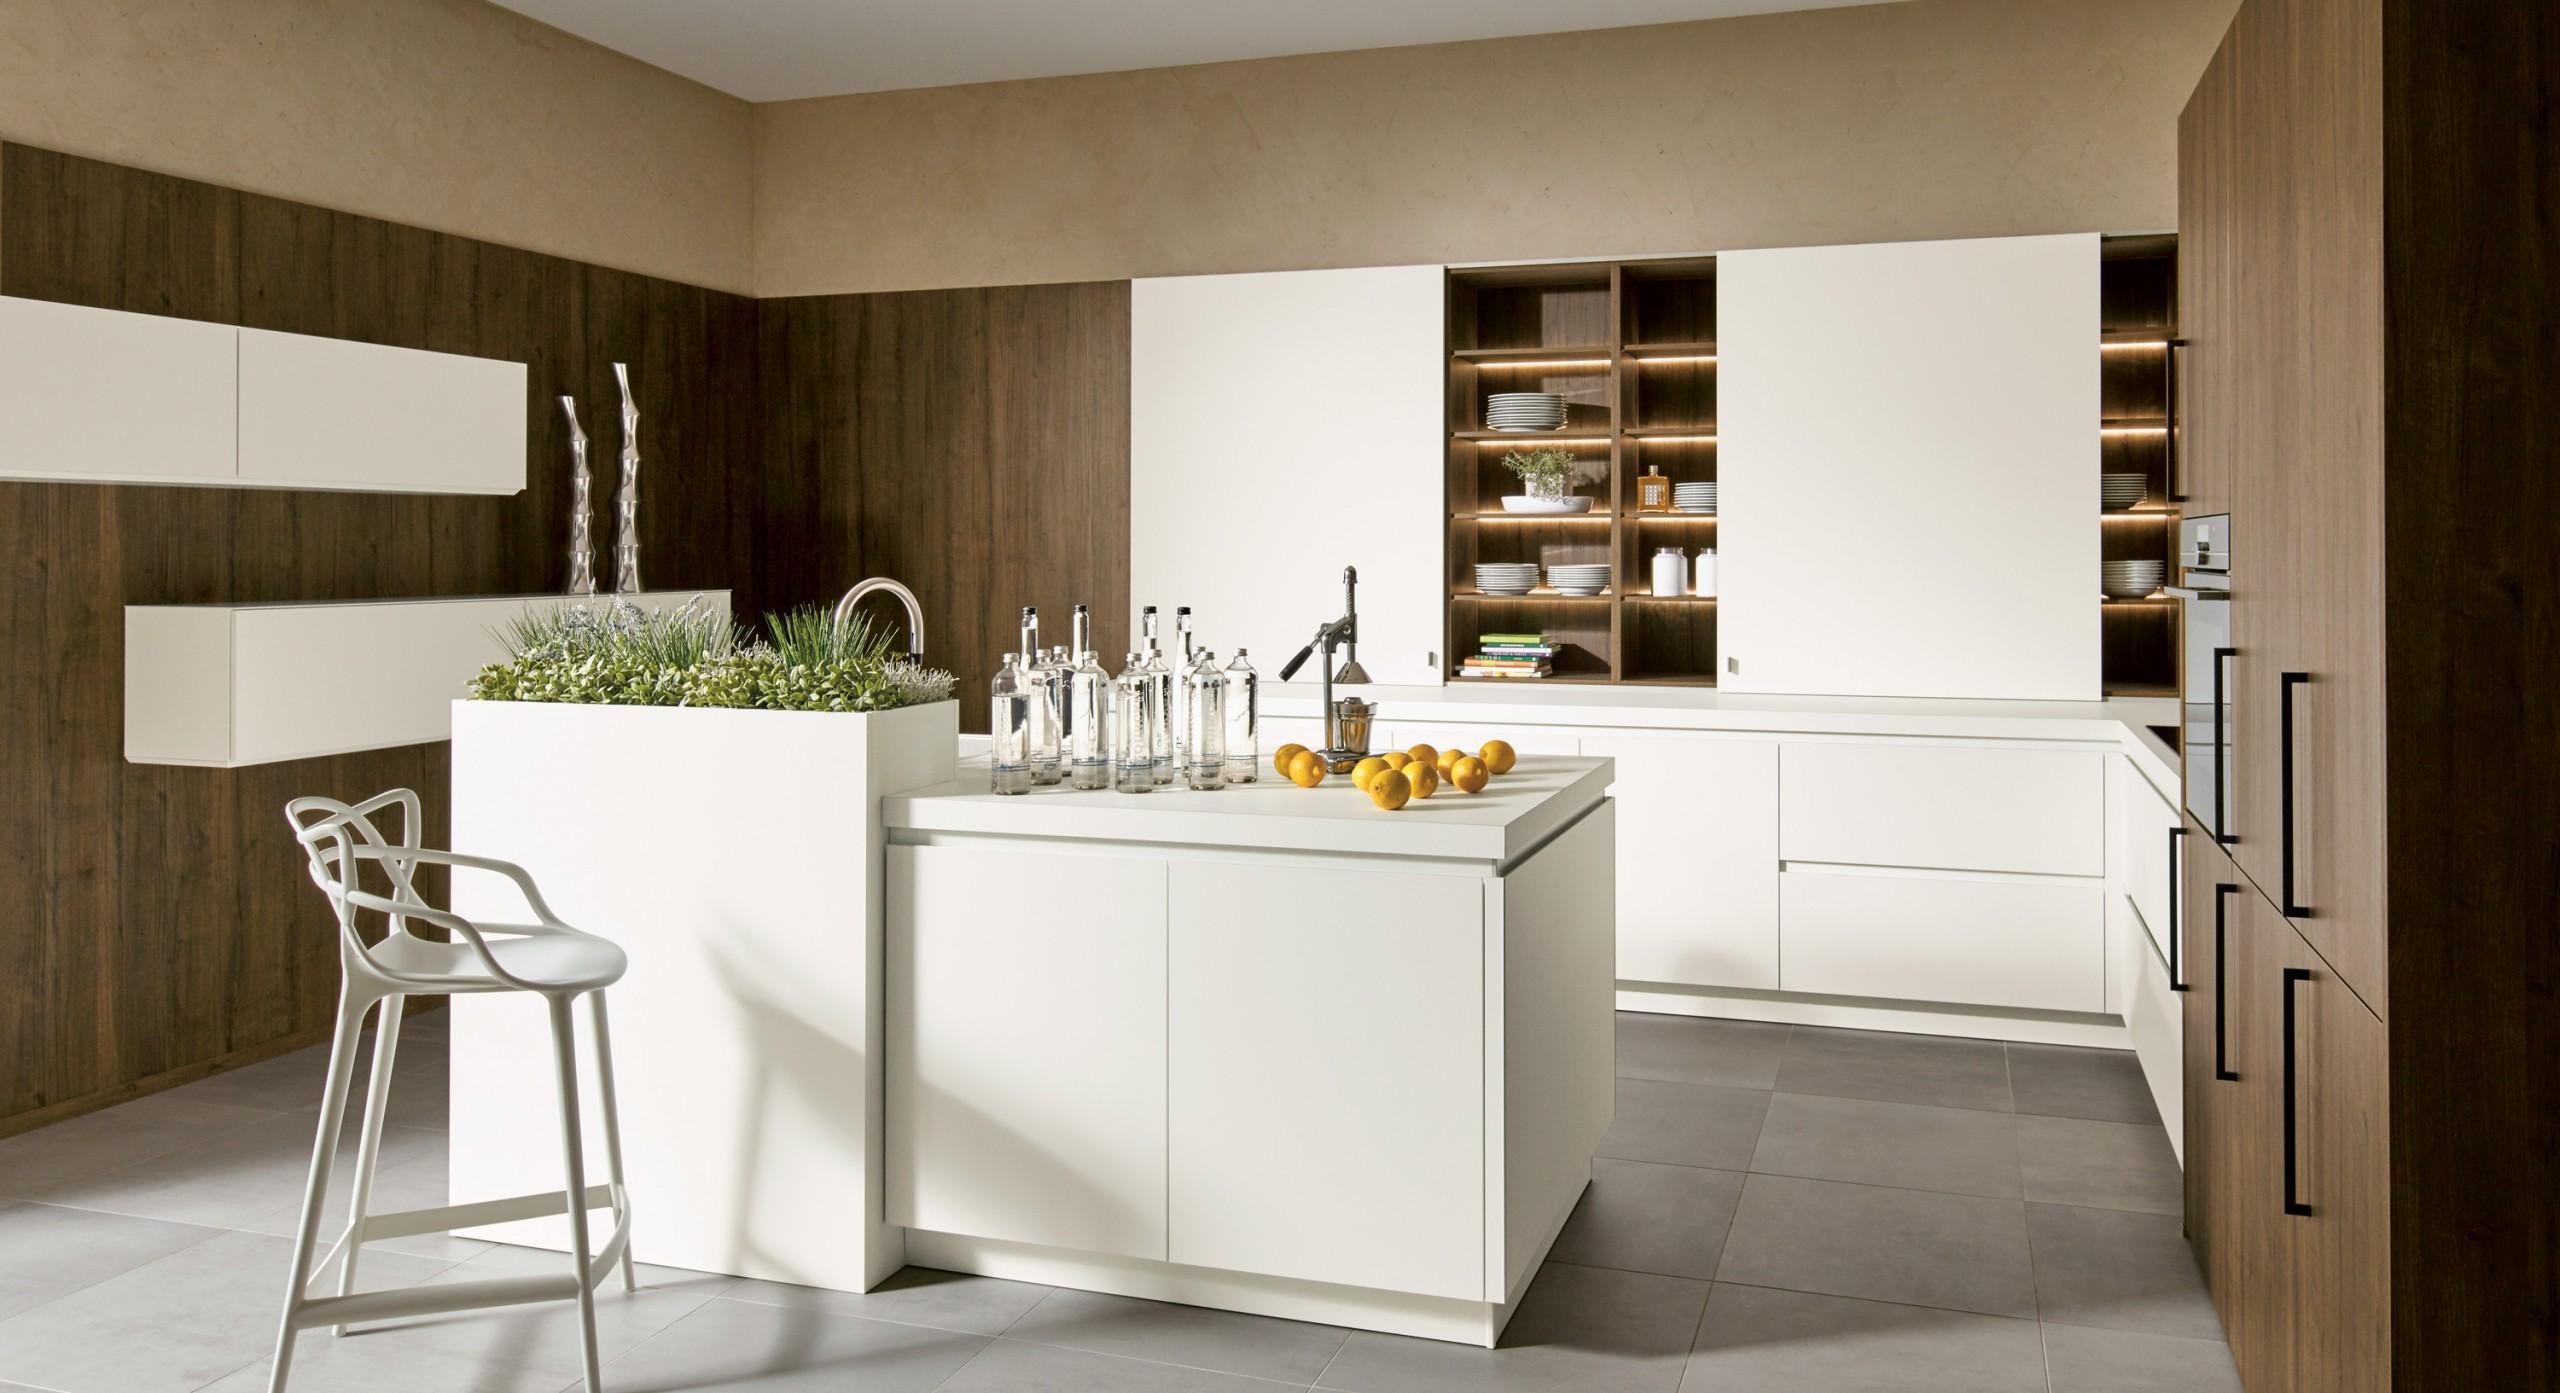 Handless contemporary kitchen with two tone doors finished in arctic white and oak brown